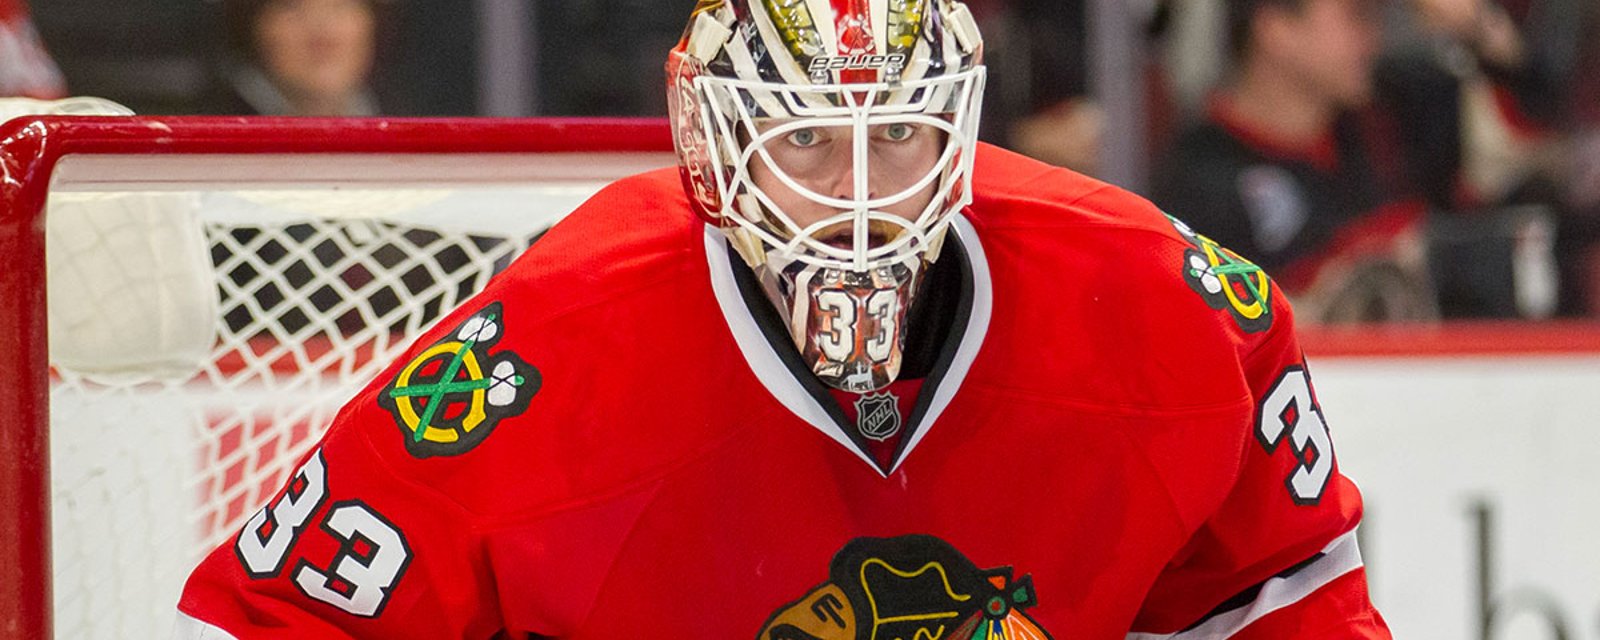 Former Hawks goalie shares his story of addiction and redemption